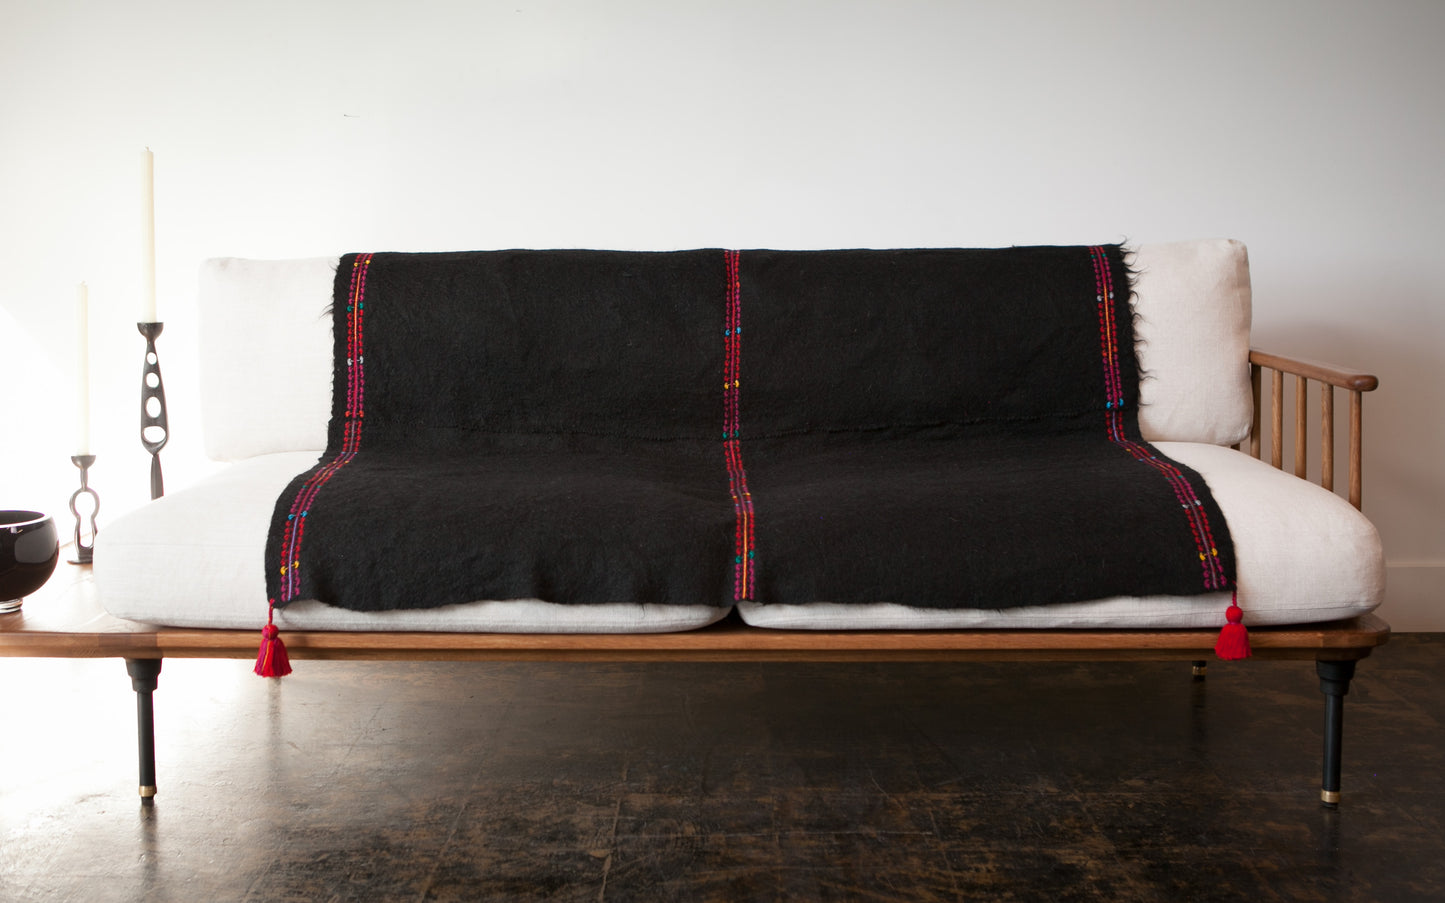 Handwoven wool throw black and red with tassels